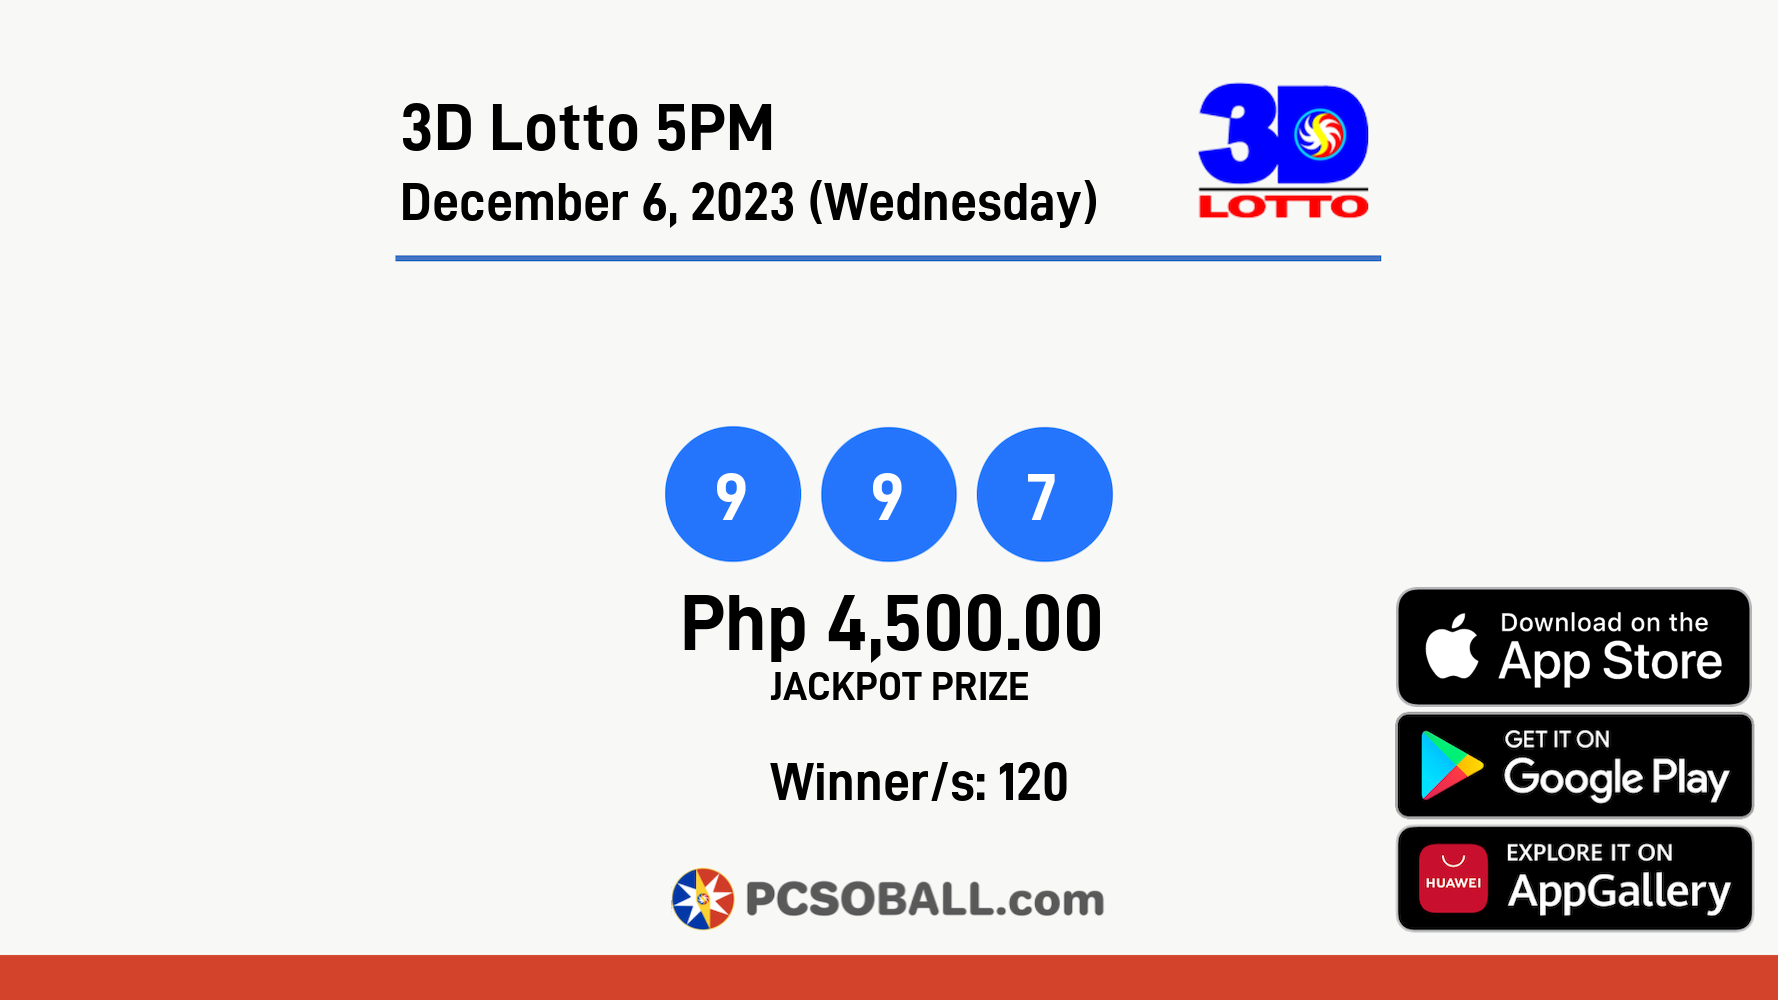 3D Lotto 5PM December 6, 2023 (Wednesday) Result